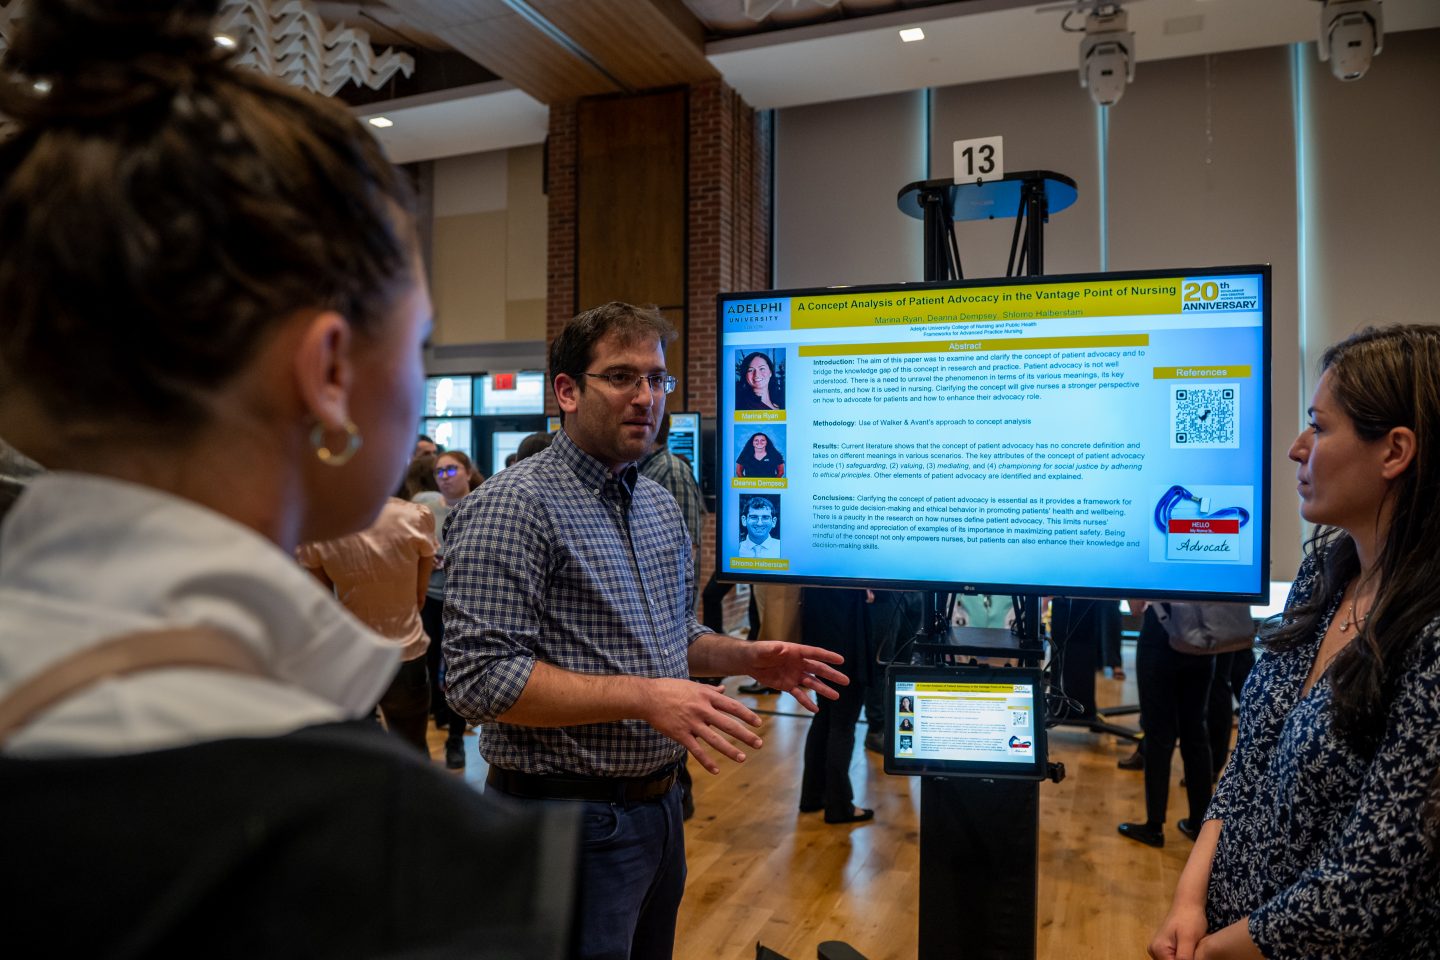 Standing by an e-poster, a white male nursing student wearing eyeglasses, a checkered, long-sleeved shirt and jeans, explains his team’s research to two young women.